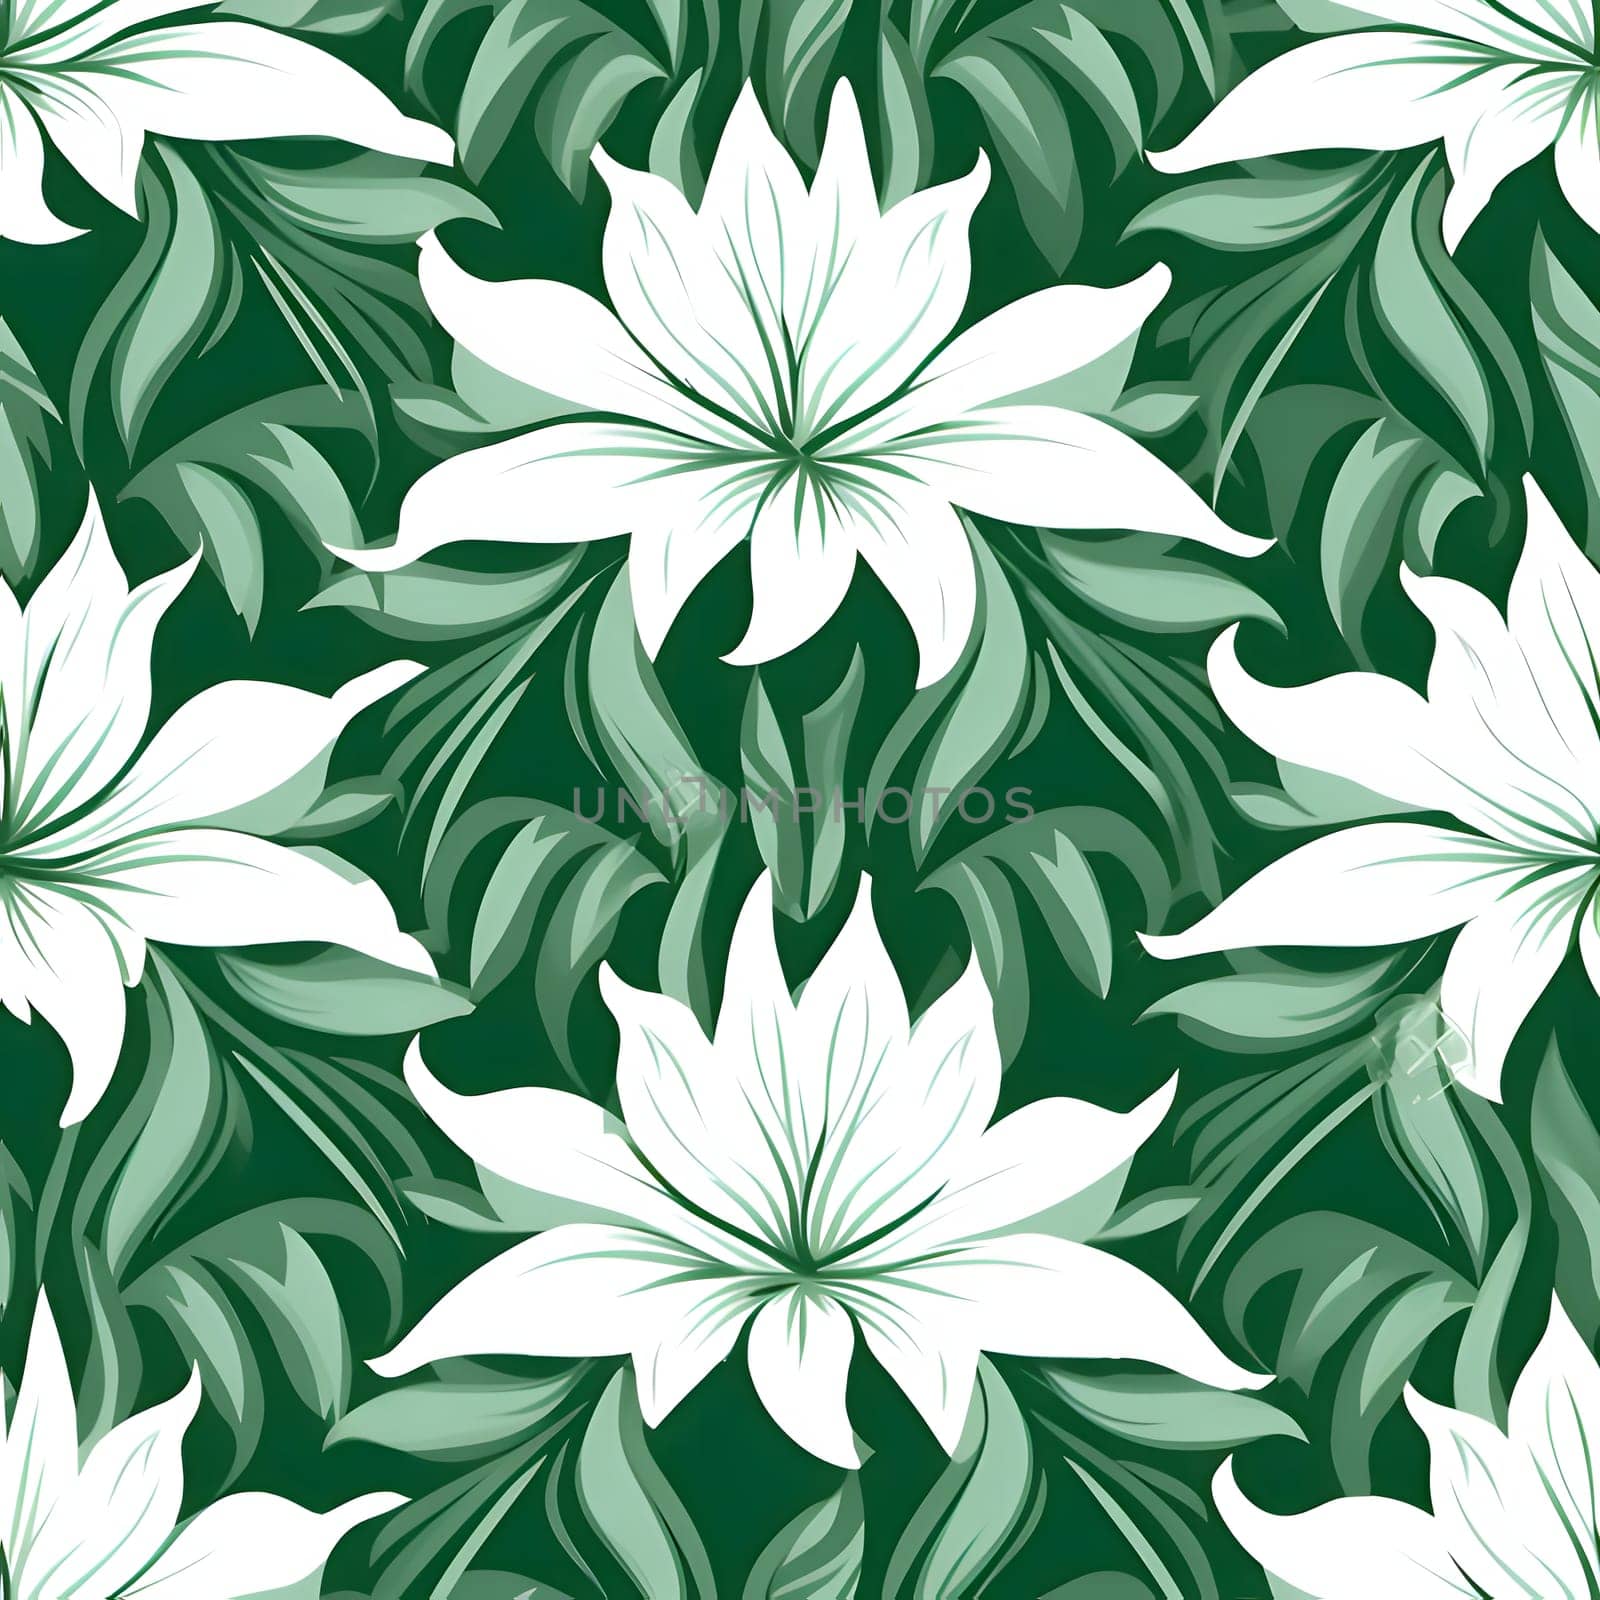 Patterns and banners backgrounds: Seamless pattern with white lily flowers on a green background